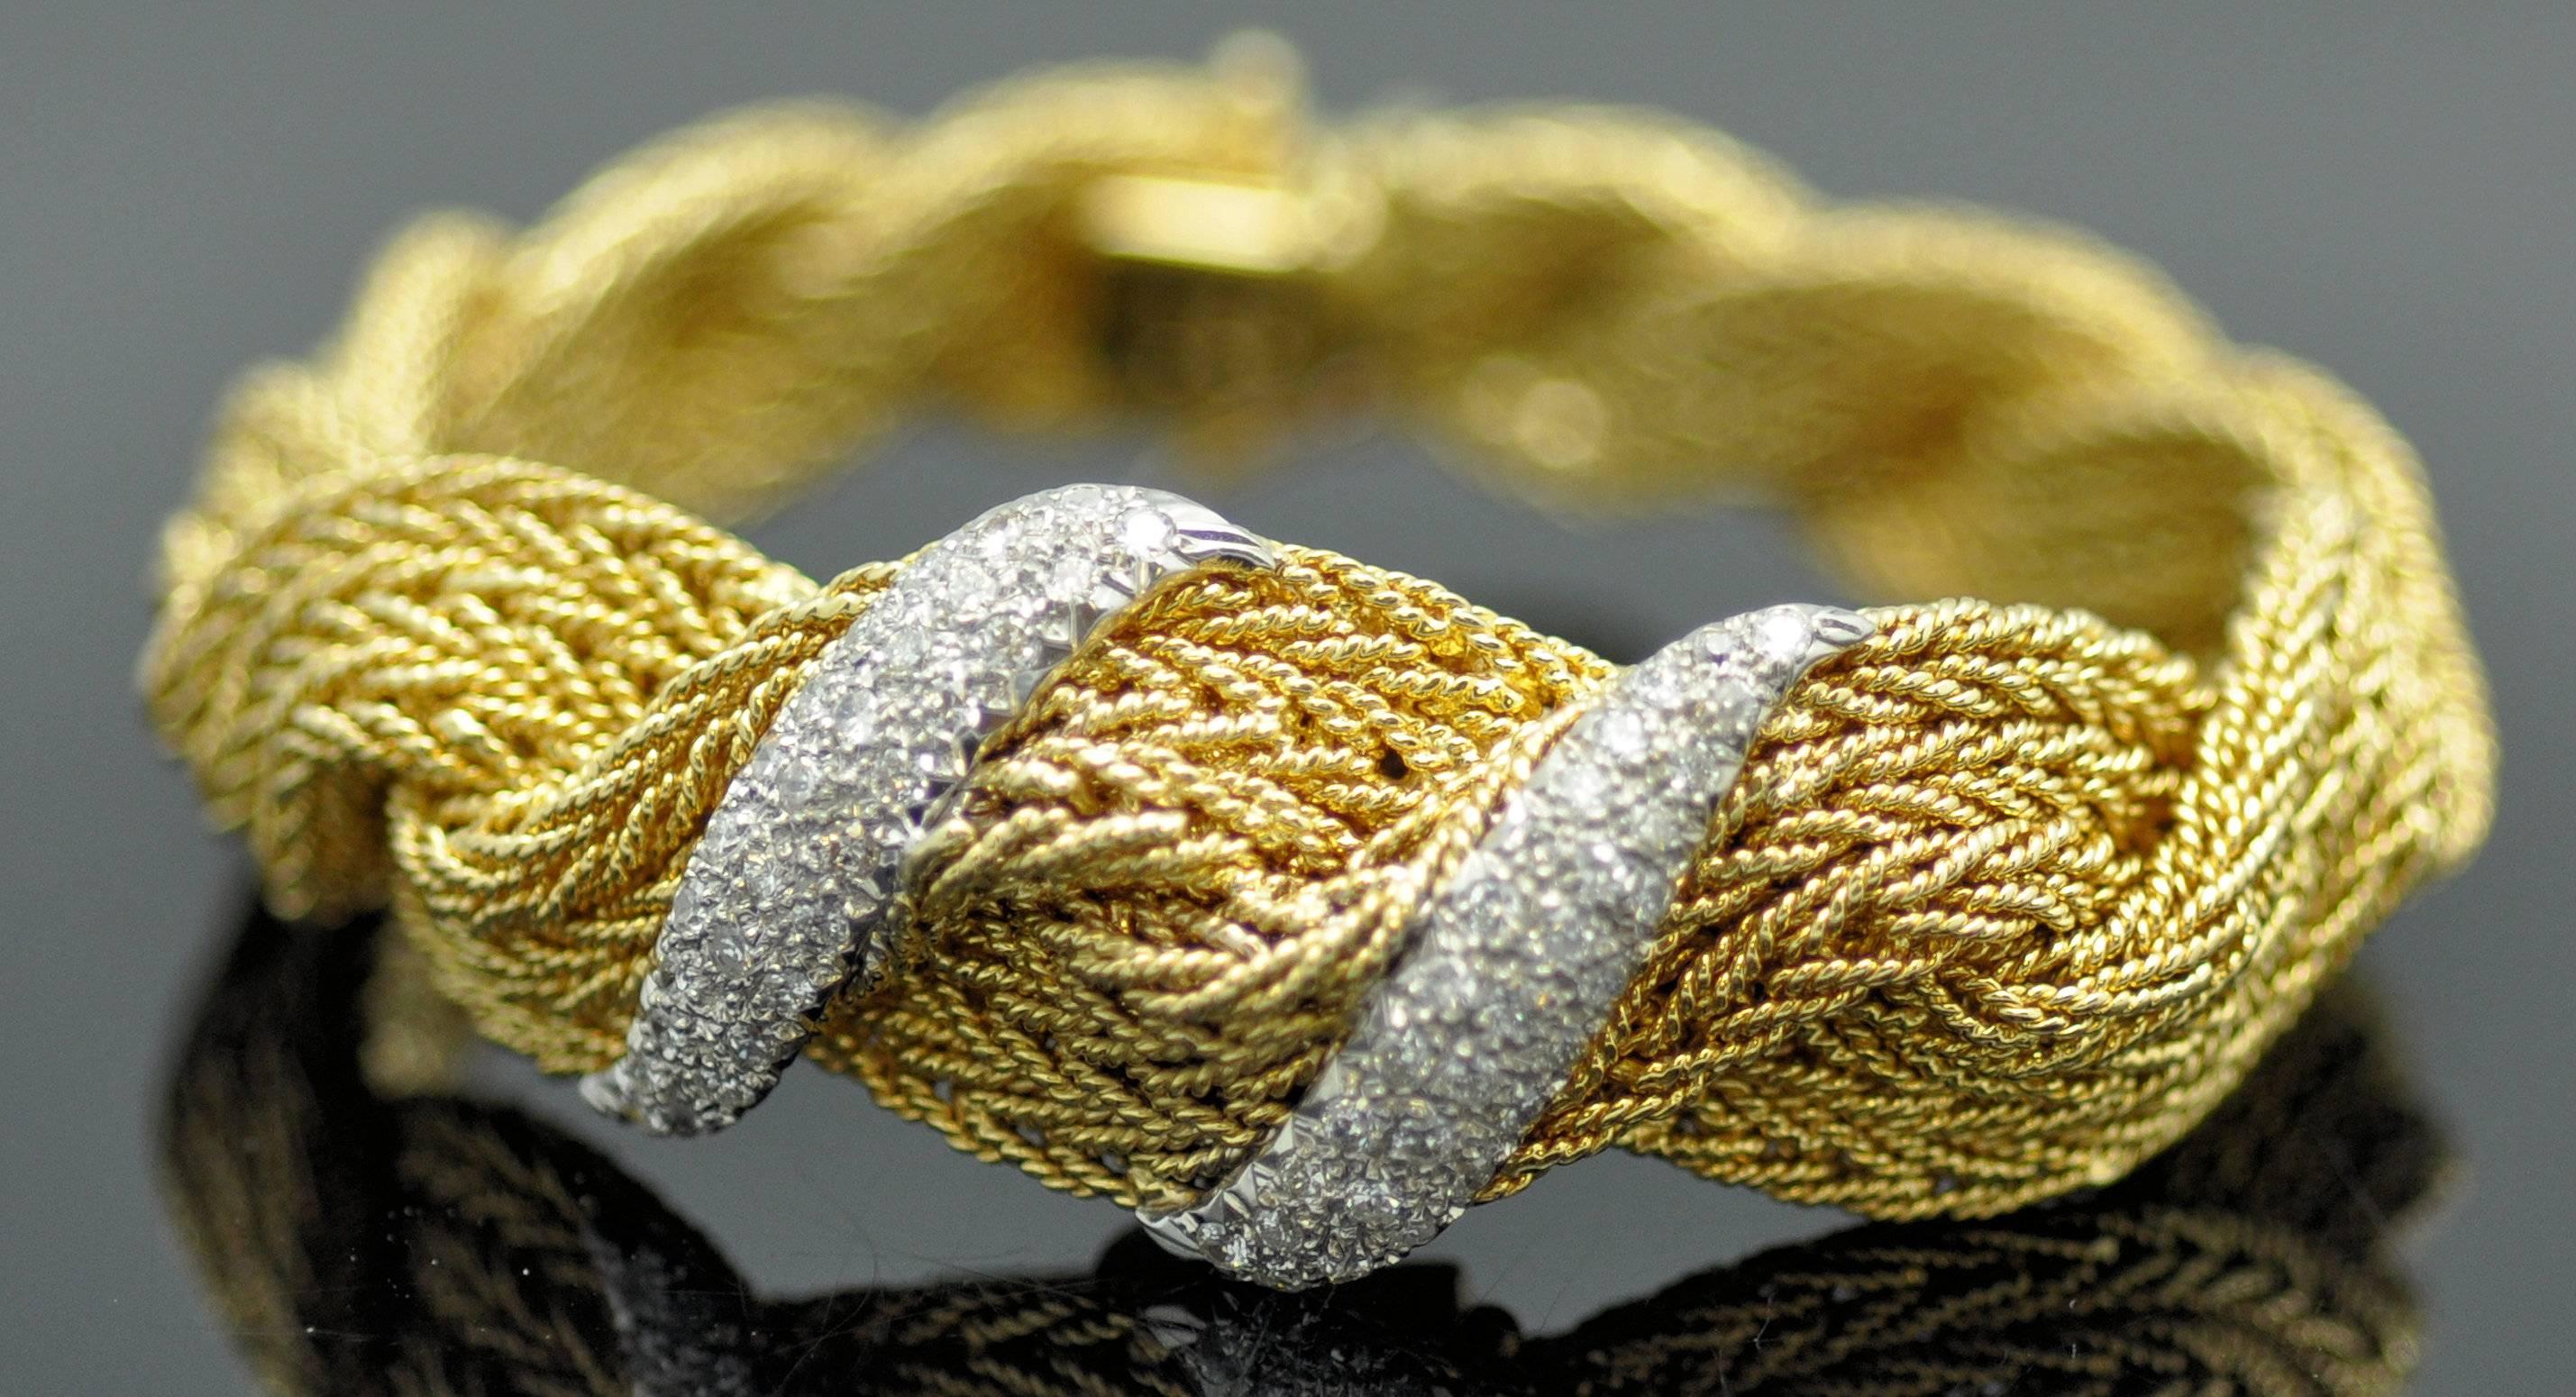 18K yellow gold woven bracelet wrist watch.  Hinged diamond set cover conceals the watch.  The bracelet is graduated, wider at the top and narrows at the back.  No one creates gold pieces like the Italians, masters of weaving it, almost like fabric.